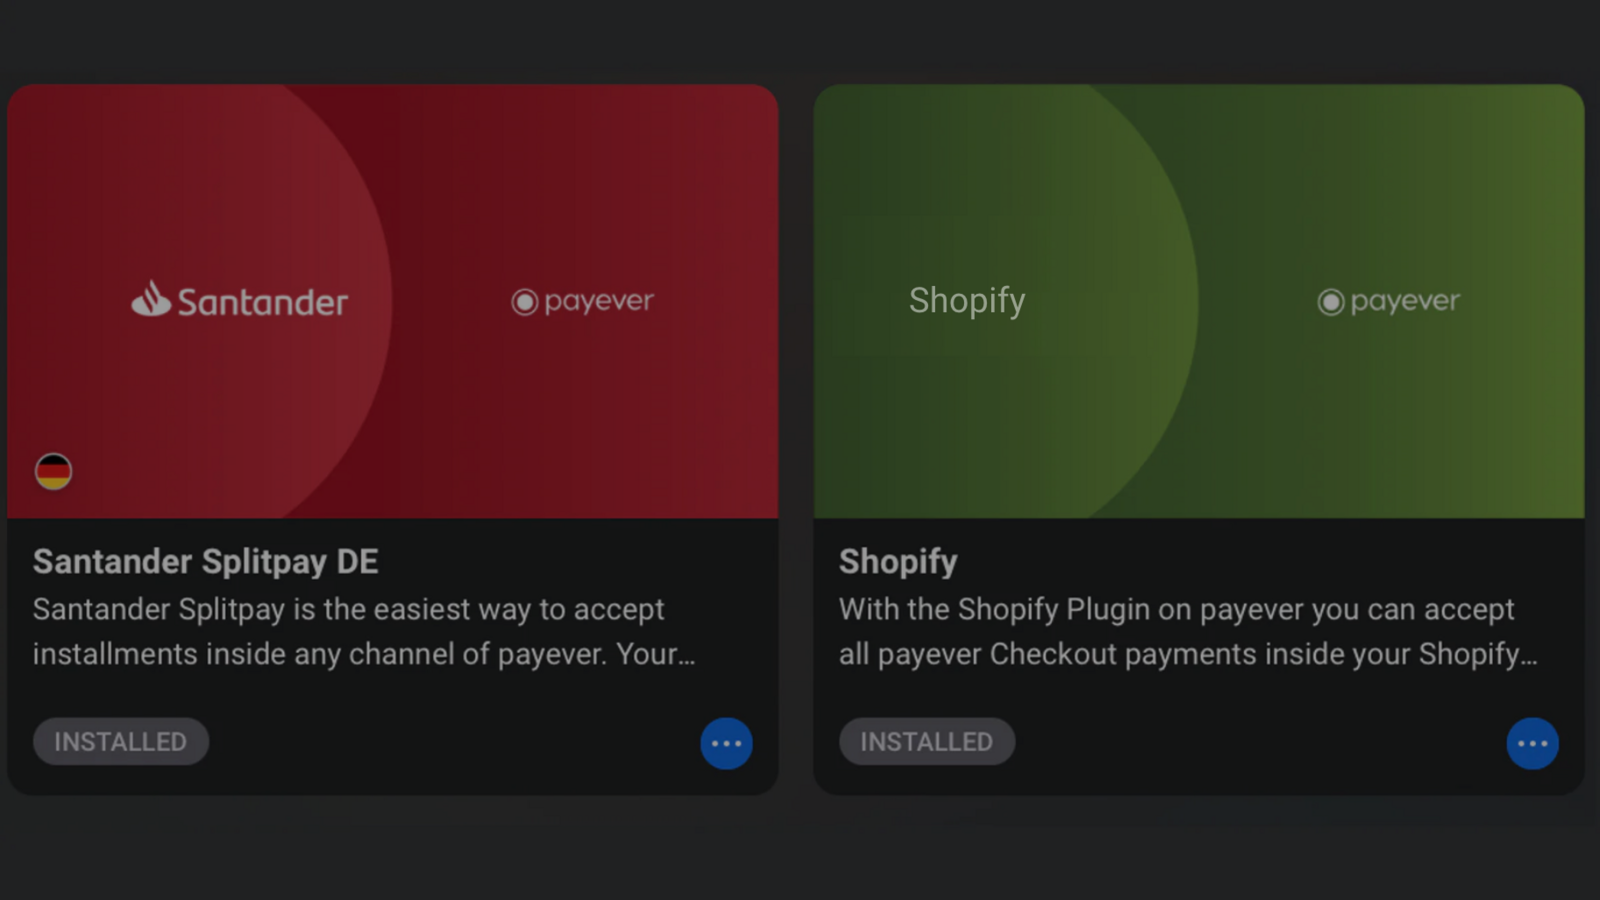 Santander Splitpay and Shopify App in payever